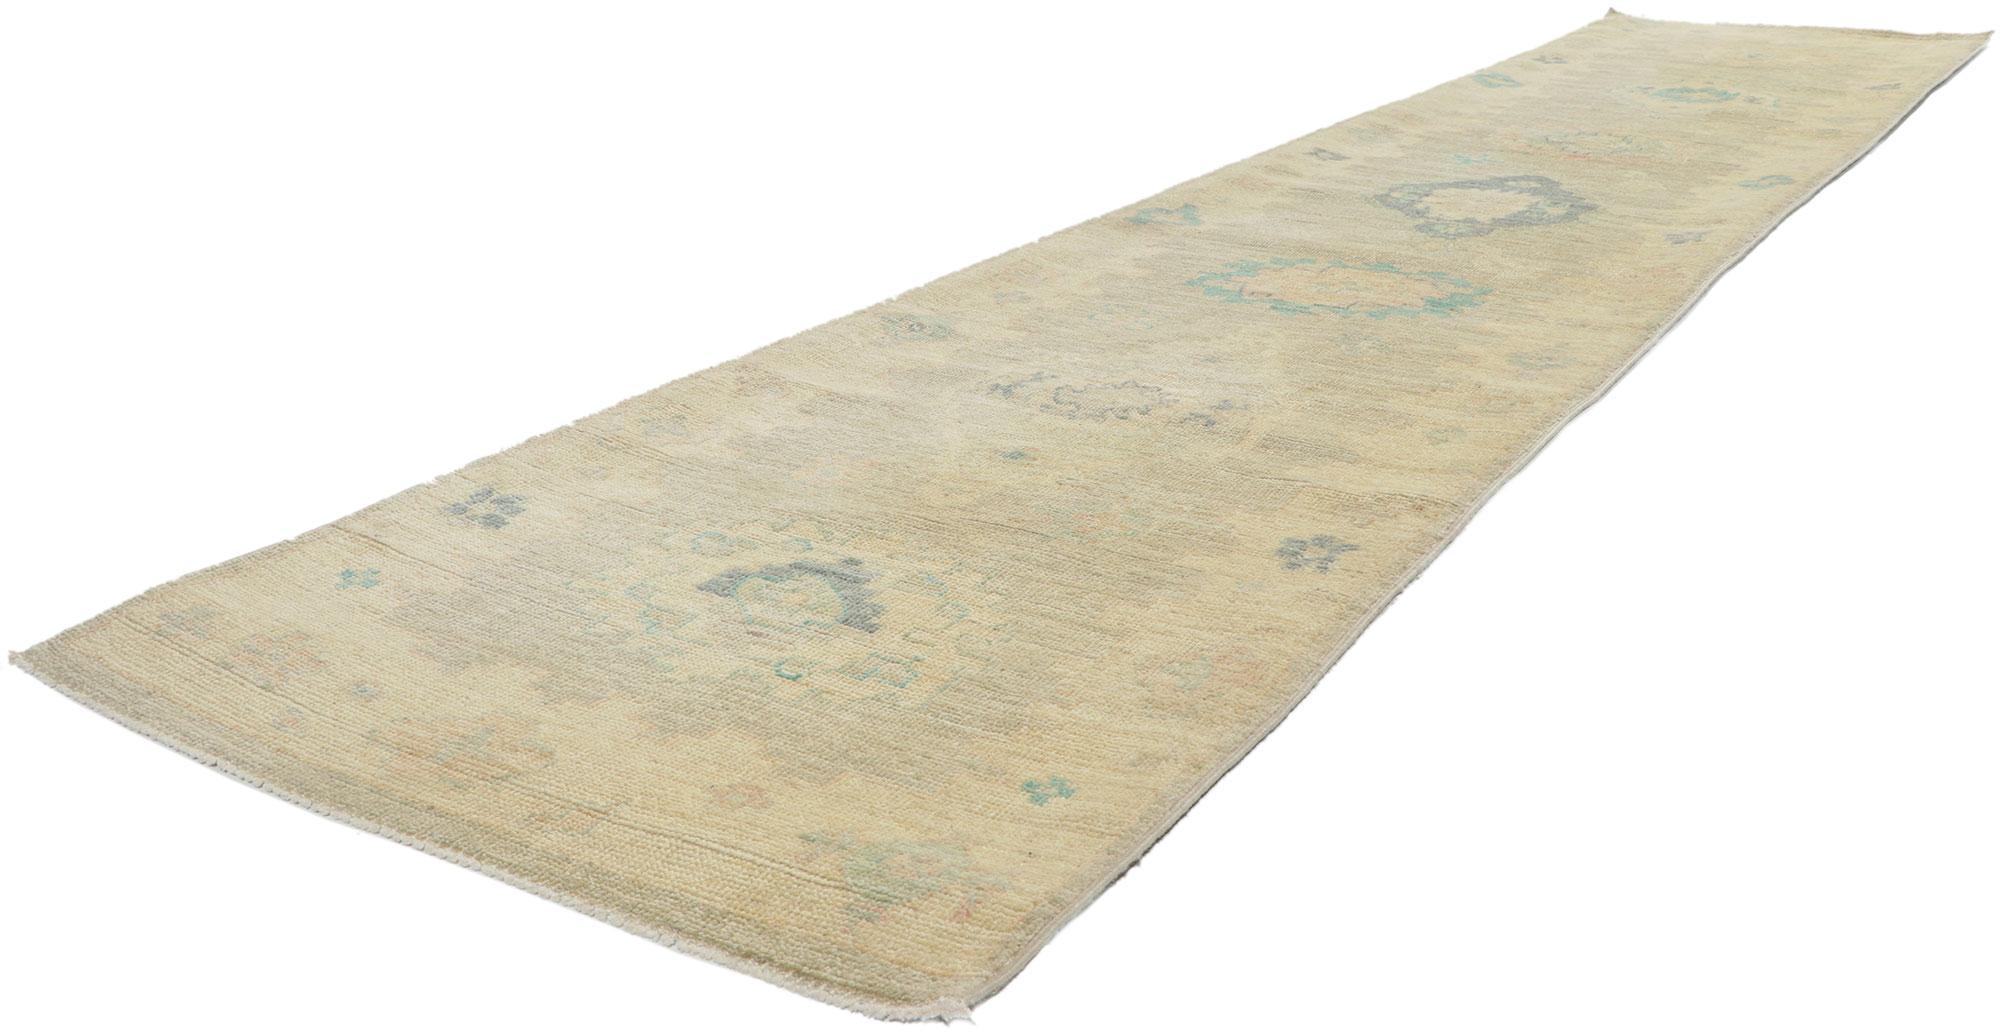 80841 Modern Oushak Rug Runner, 02'05 x 11'10.
Transport yourself into a world of contemporary elegance and tranquil sensibility with this hand knotted wool modern Oushak rug runner. Its nature-inspired design and muted pastel color palette merge